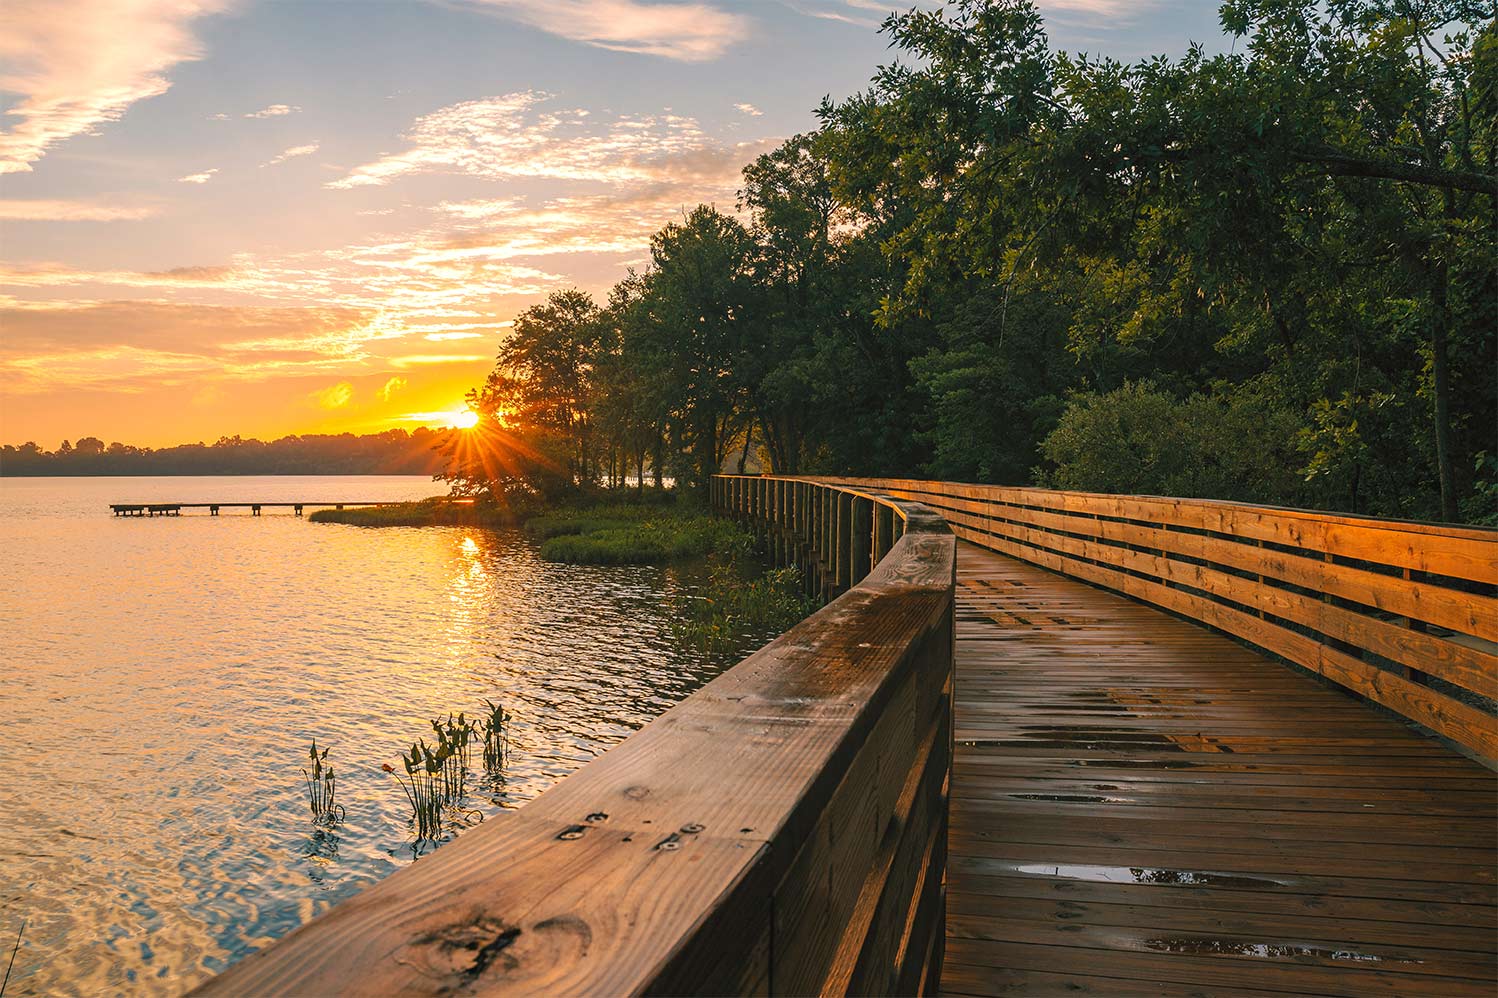 The Hopewell Riverwalk has opened up the scenic Appomattox River to more access. Photo by Daniel Jones, courtesy of Virginia Tourism Corporation.